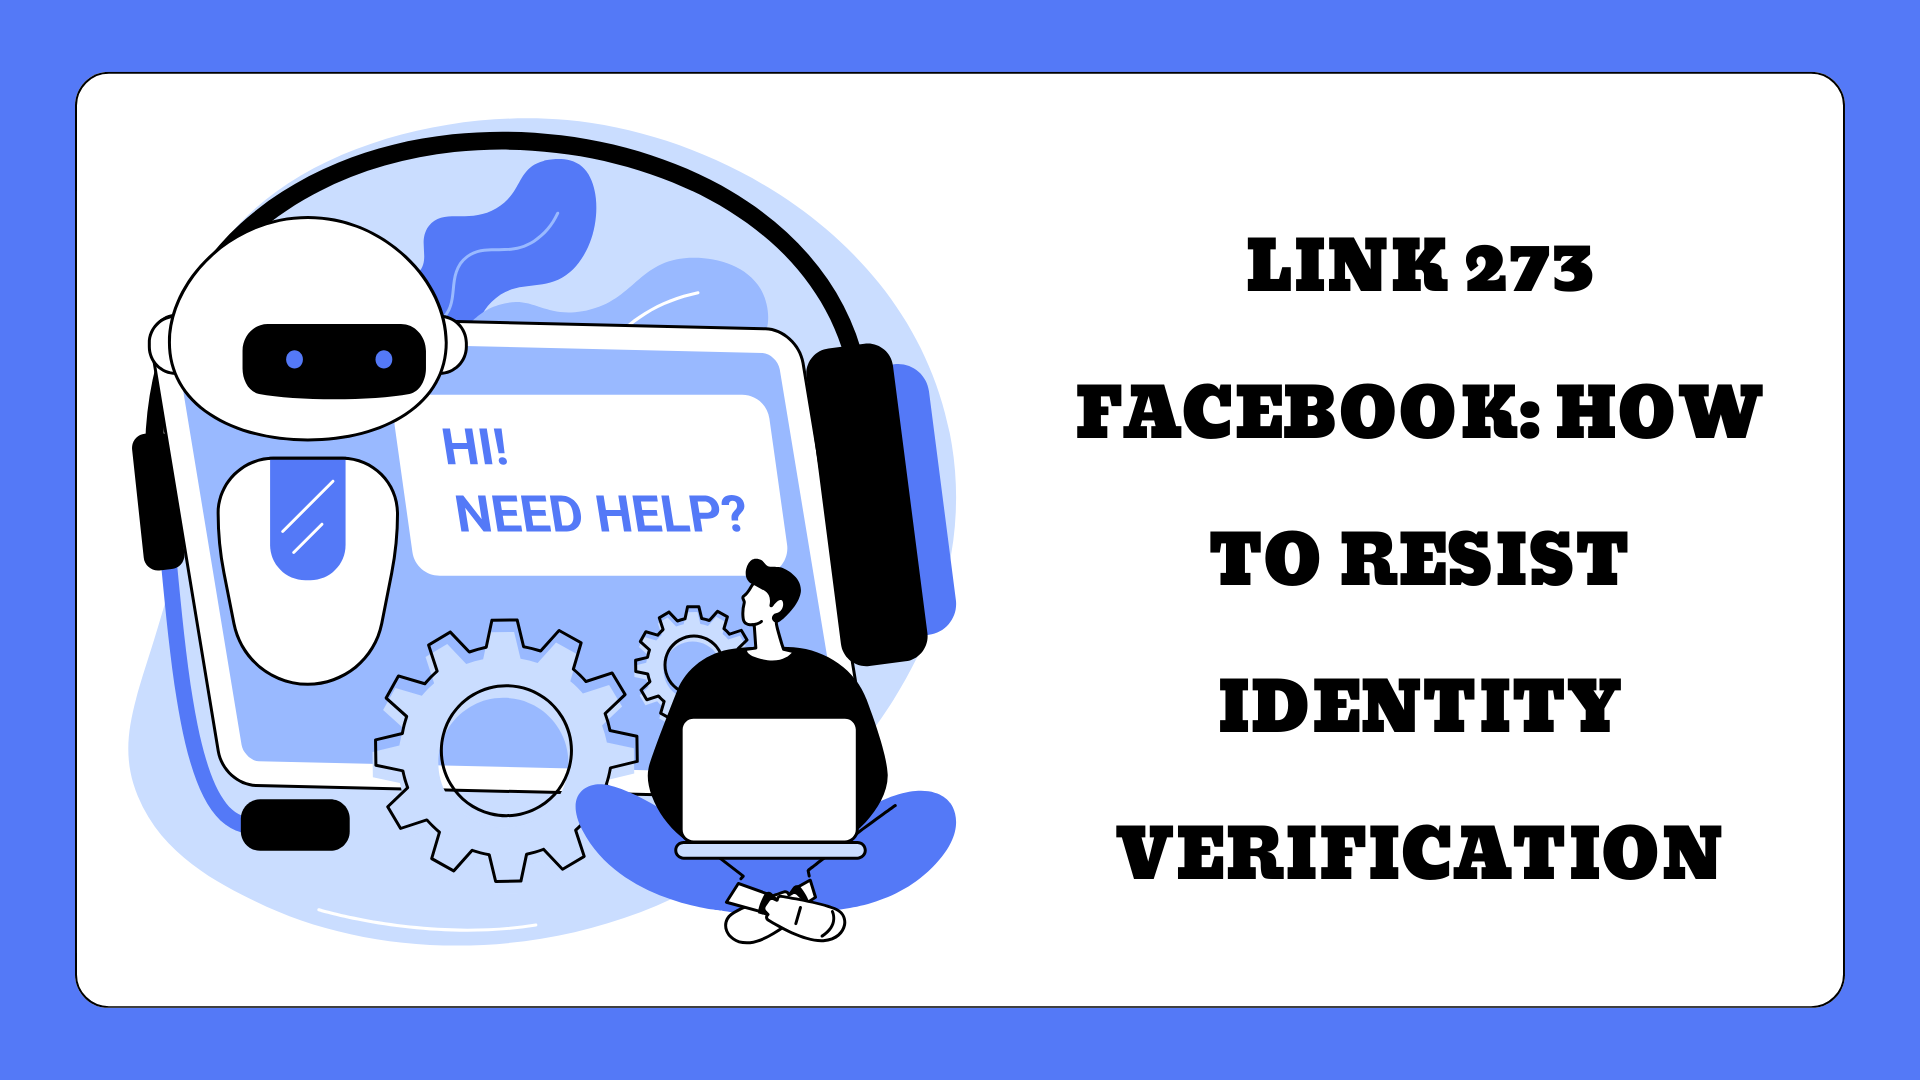 Link 273 Facebook: How to resist identity verification